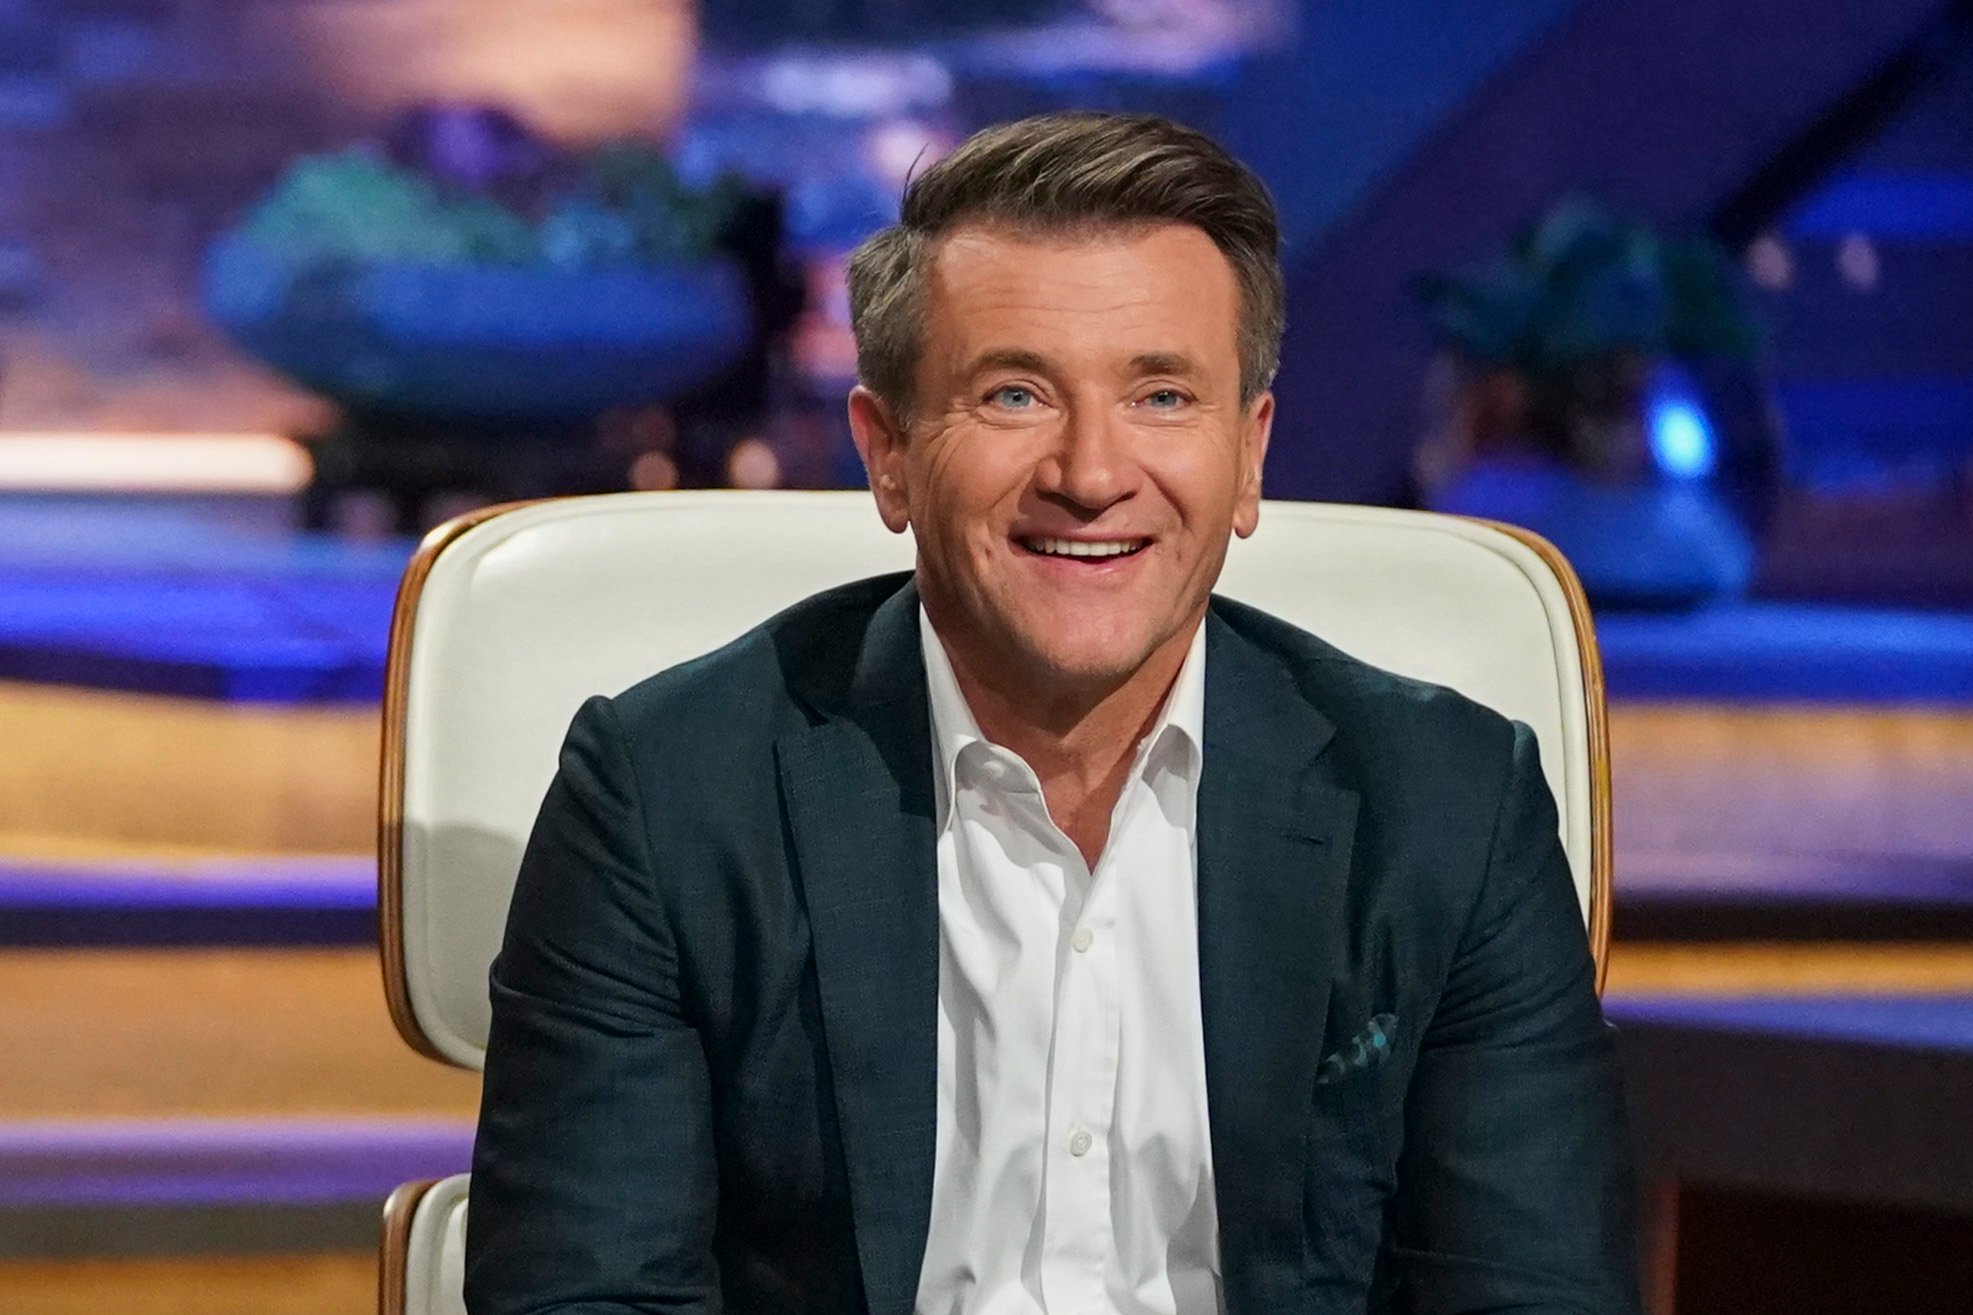 Shark Tank's Robert Herjavec sitting on the show's panel and smiling